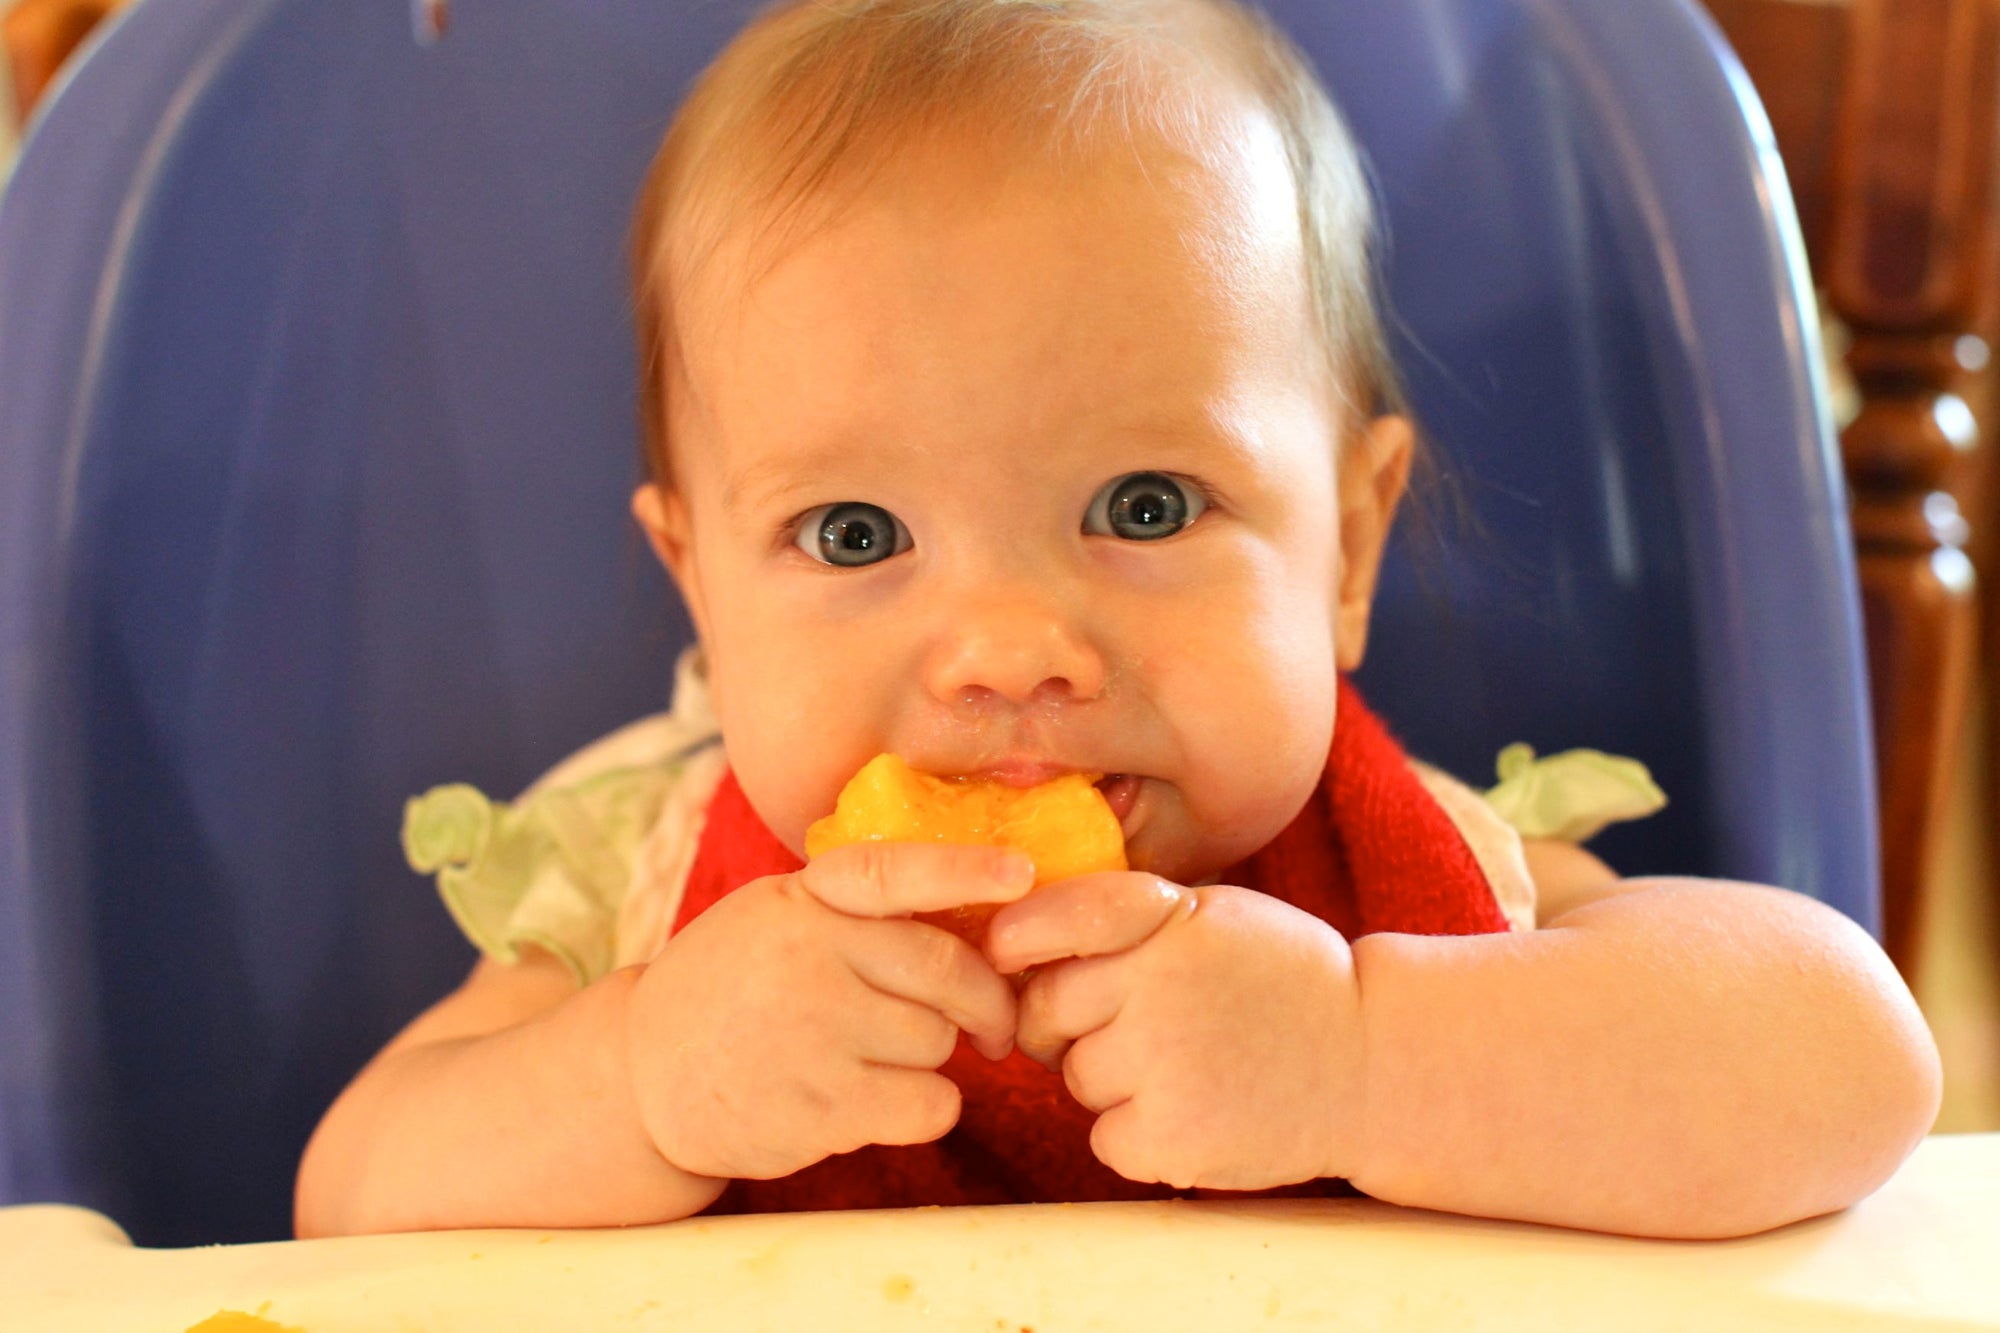 8 REASONS WHY YOU SHOULD WAIT UNTIL YOUR BABY IS 6 MONTHS OLD TO FEED THEM SOLIDS